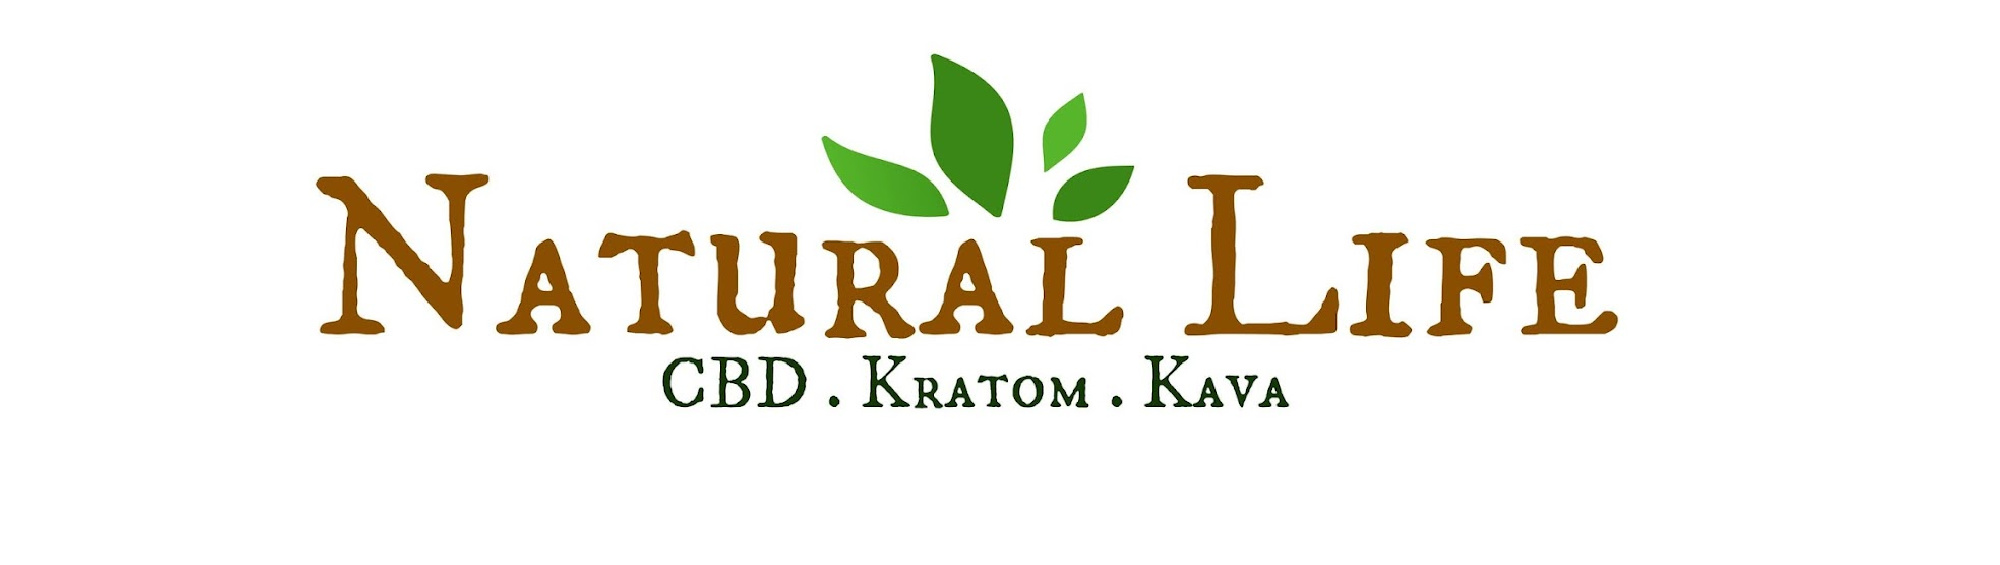 Best Places To Buy Kratom in Tallahassee, Florida